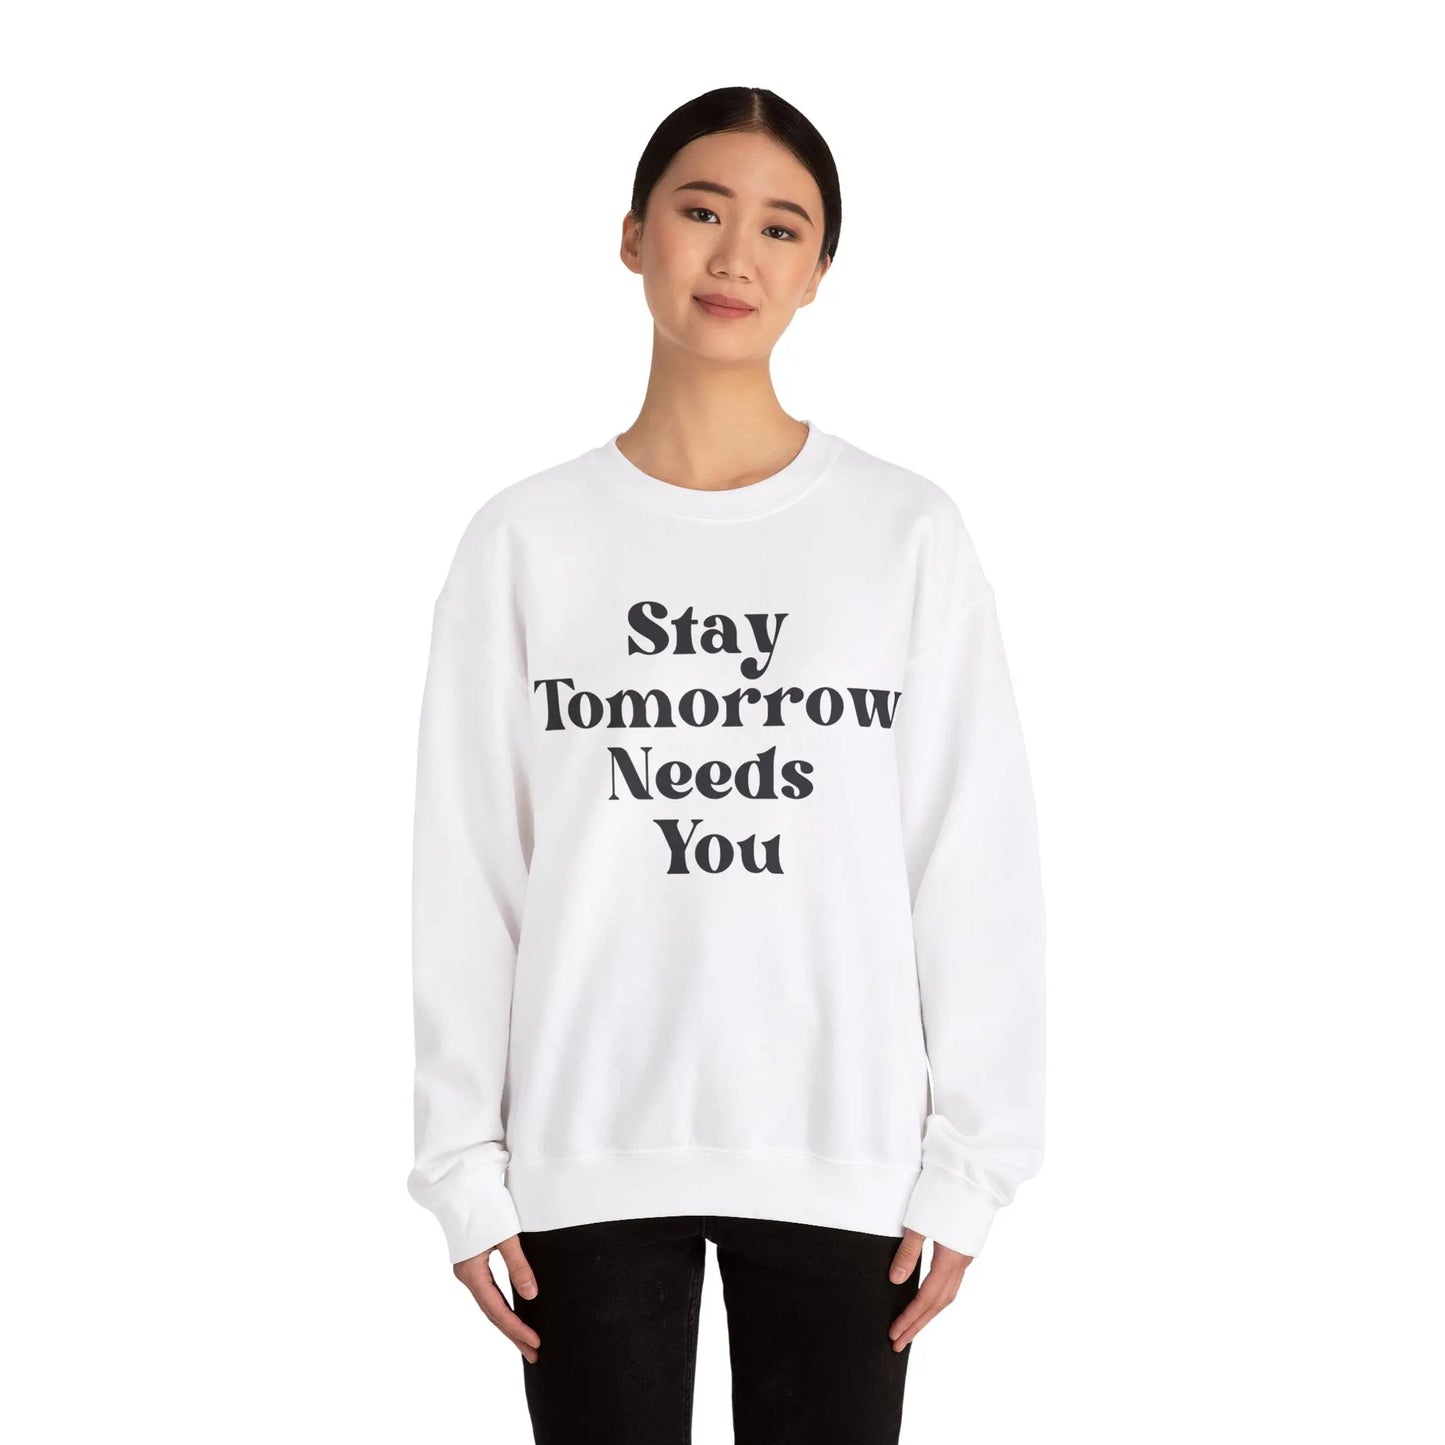 Retro Hippie Boho Stay Tomorrow Needs You Mental Health Awareness Sweatshirt Suicide Prevention Mothers Day Fathers Day Gift Veterans Support Military Gift - Stay Tomorrow Needs You Retro Hippie Boho Stay Tomorrow Needs You Mental Health Awareness Sweatshirt Suicide Prevention Mothers Day Fathers Day Gift Veterans Support Military Gift